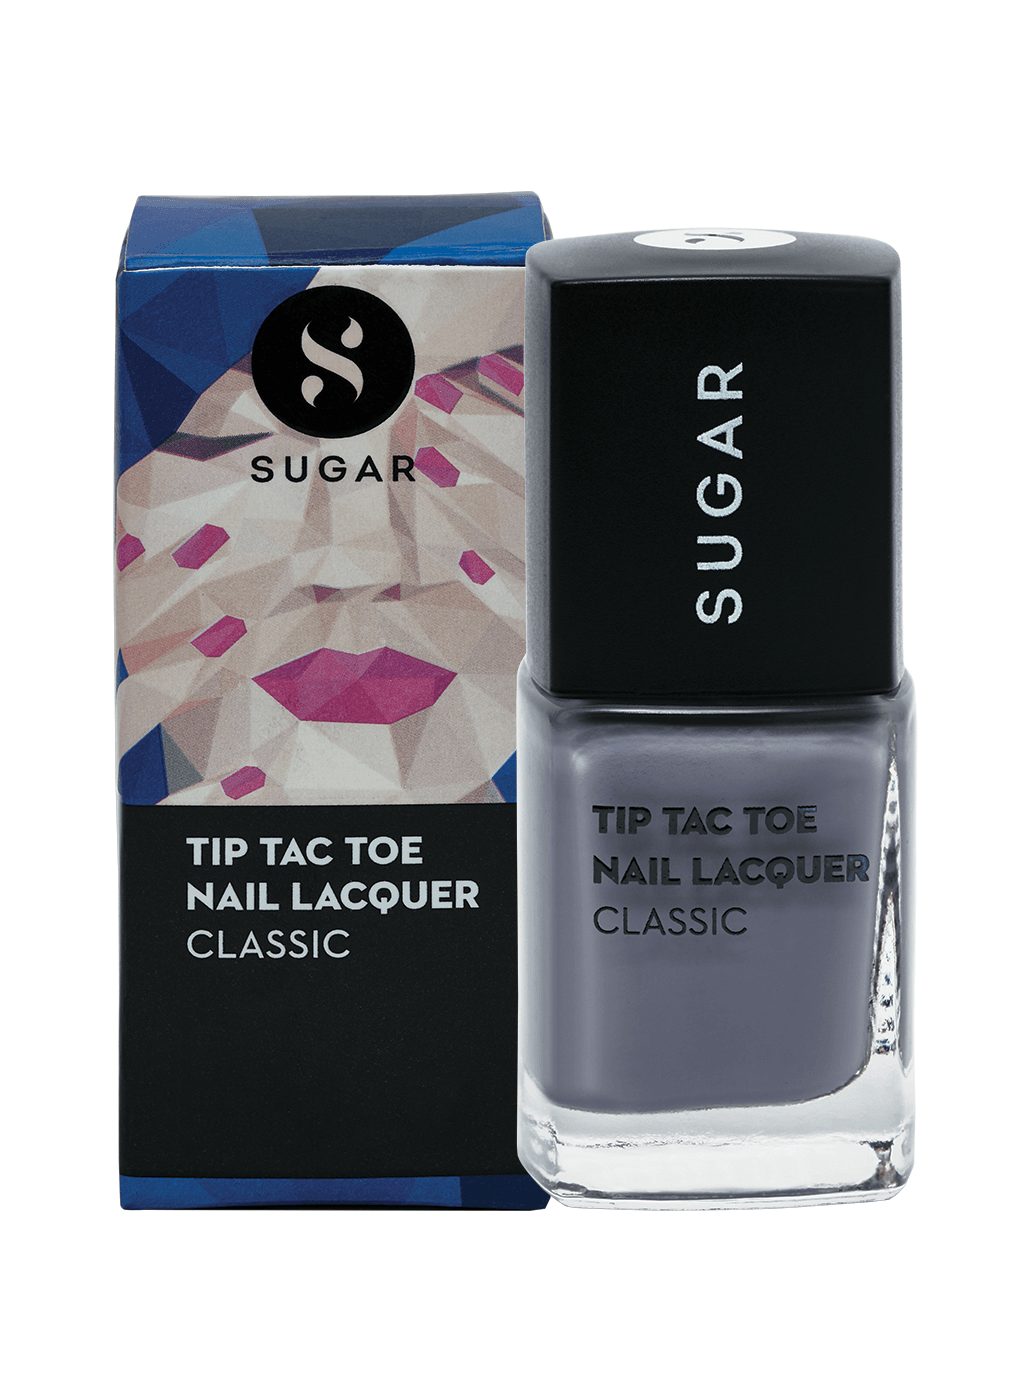 Tip Tac Toe Nail Lacquer - 010 Grays Of God (Lavender)